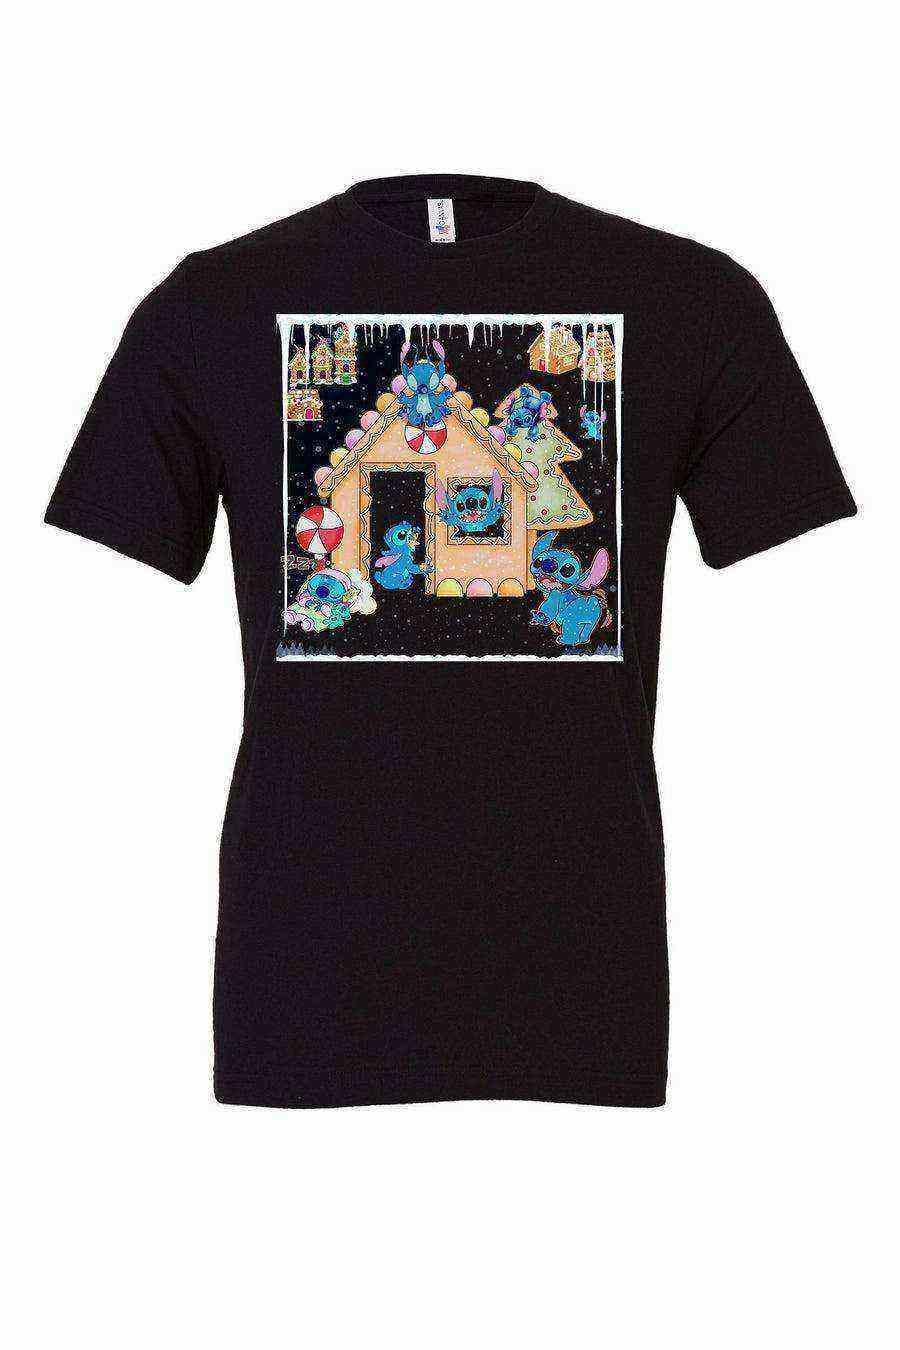 Womens | Stitch Finds A Gingerbread House Shirt | Stitch Christmas Shirt - Dylan's Tees